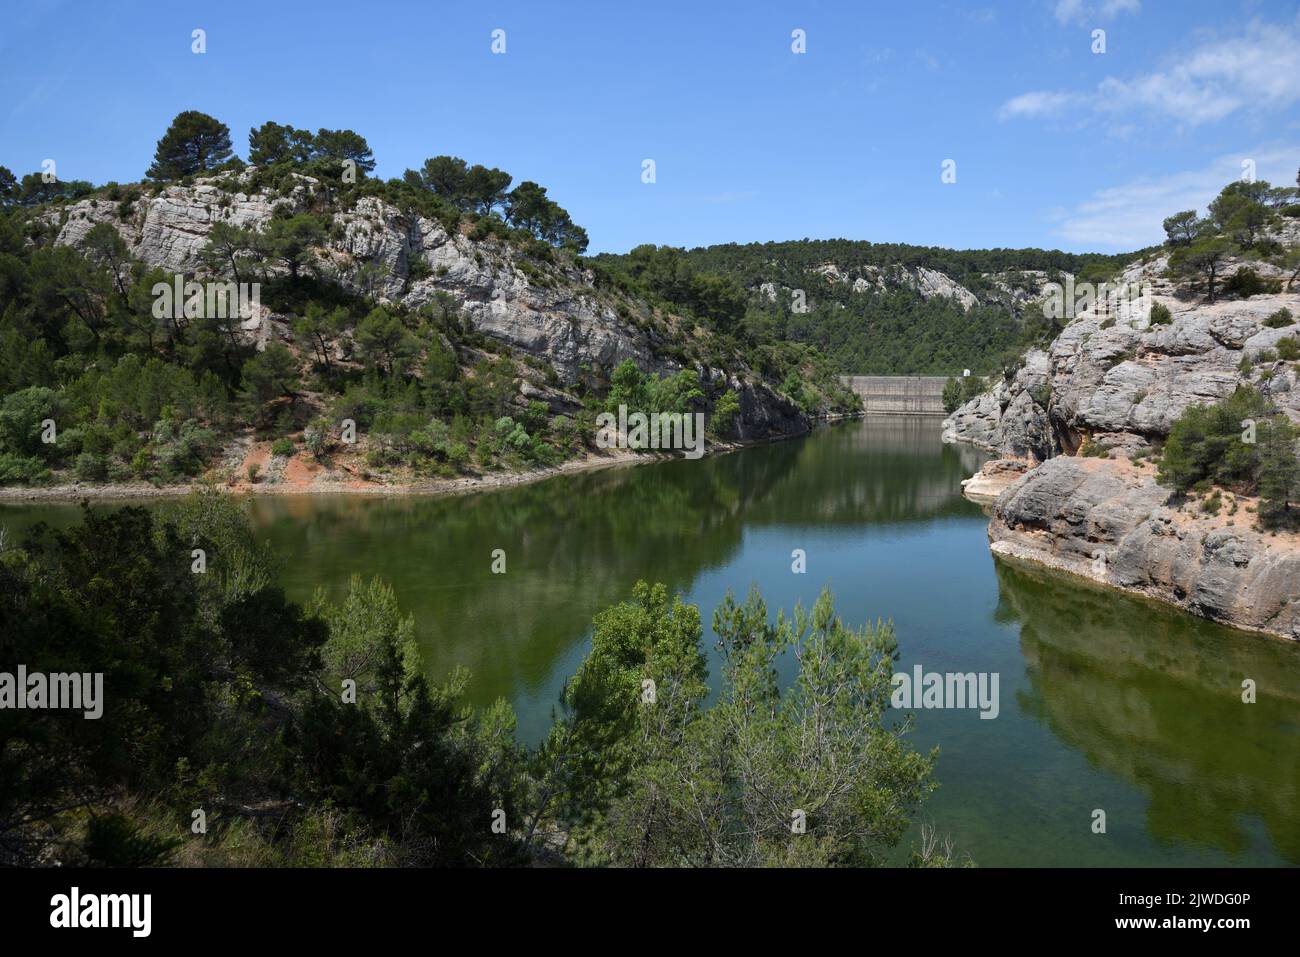 Lac Zola or Zola Lake in the Sainte Victoire Mountain Nature Reserve Aix-en-Provence Provence France Stock Photo